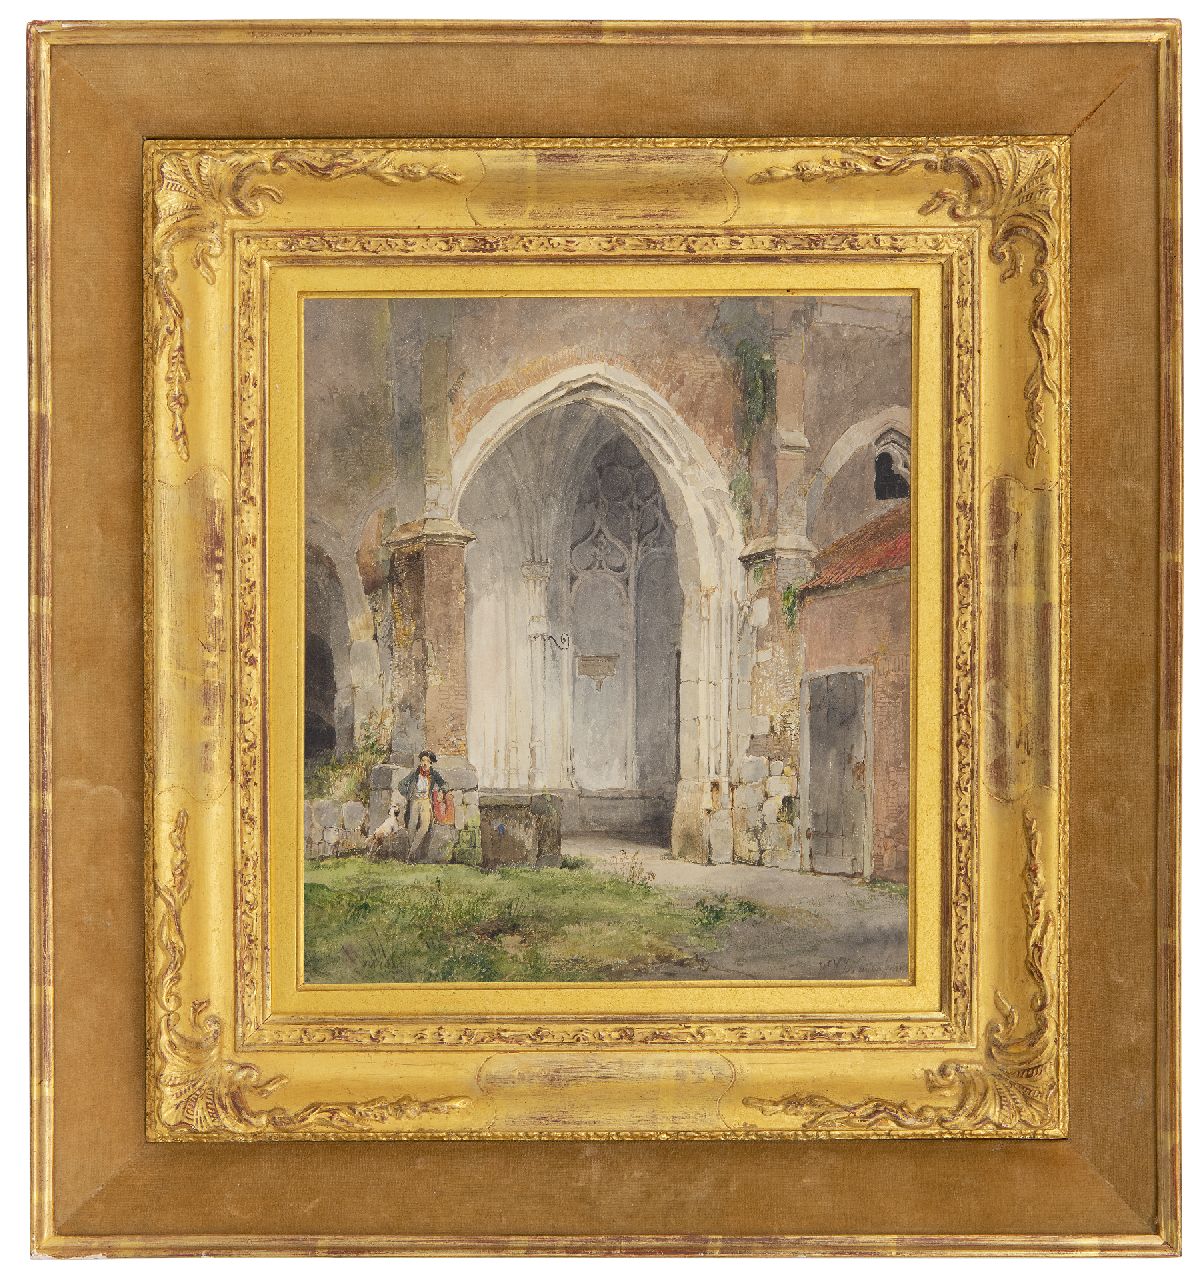 Nuijen W.J.J.  | Wijnandus Johannes Josephus 'Wijnand' Nuijen | Watercolours and drawings offered for sale | Man and his dog in the cloister of the Dom of Utrecht, watercolour on paper 26.5 x 23.6 cm, signed l.r. and dated 1833